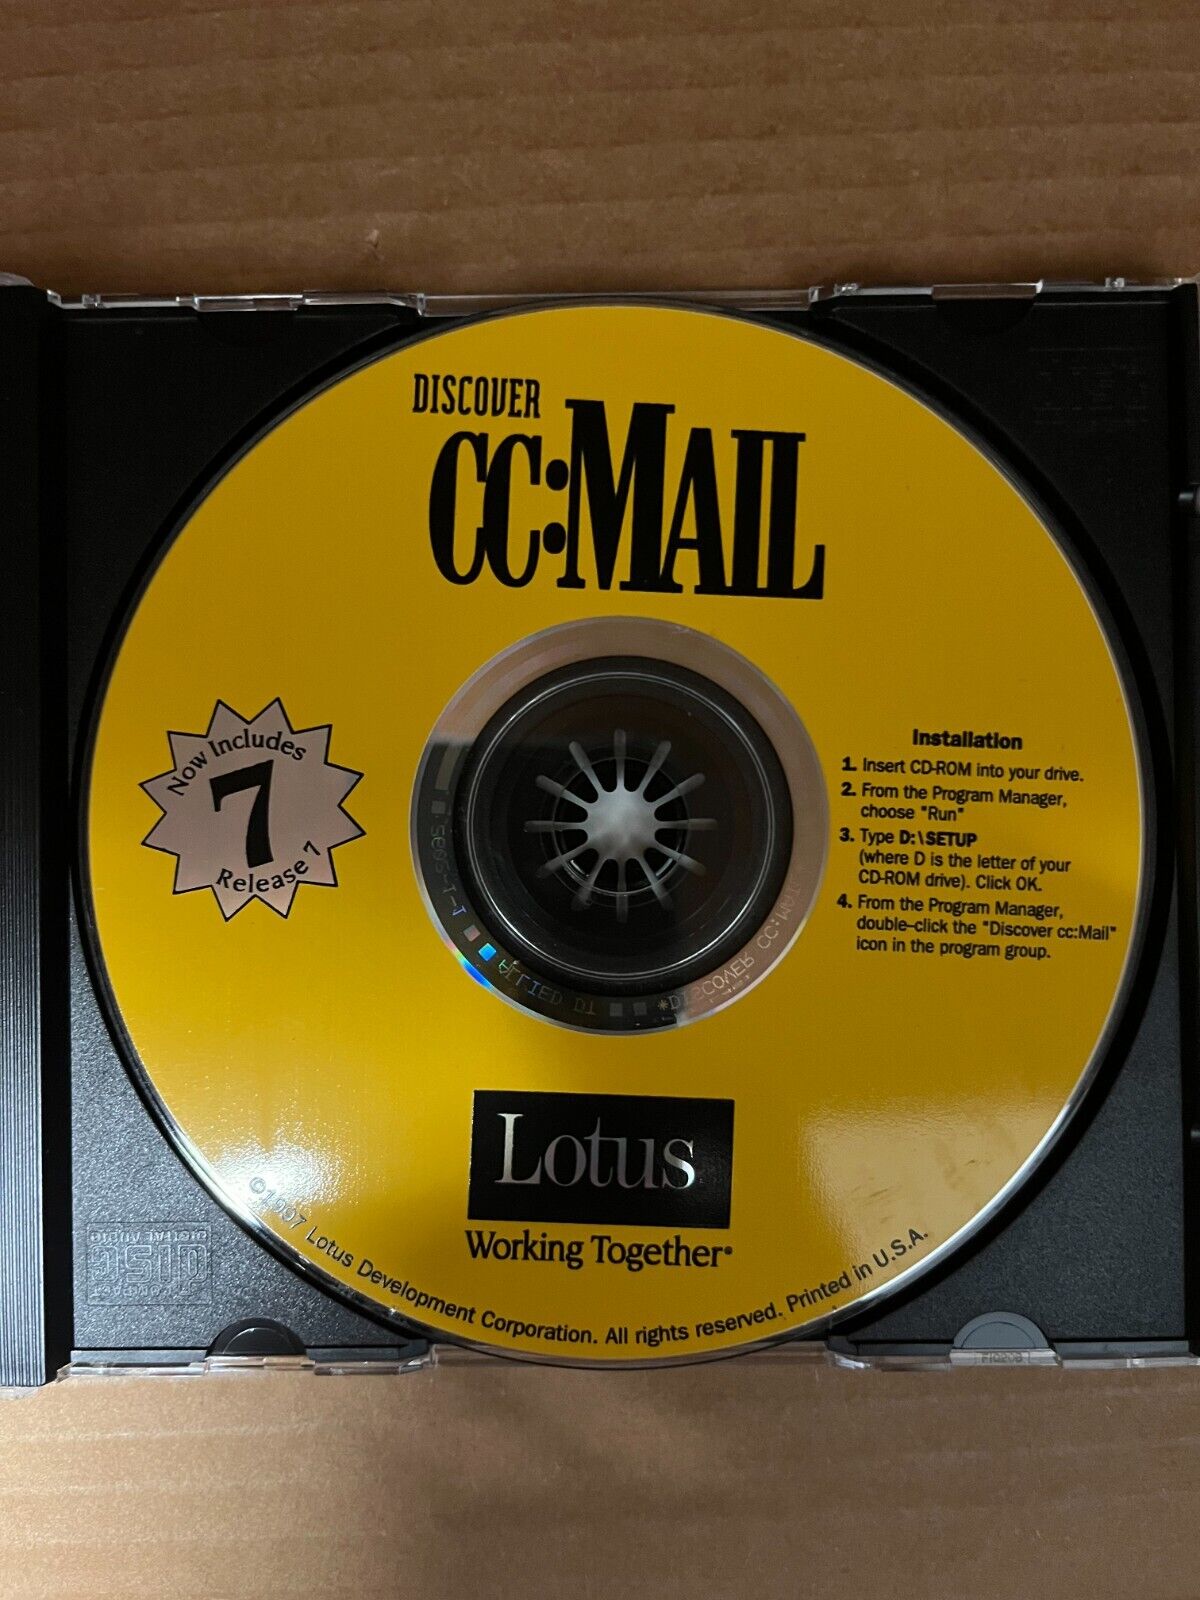 Rare, Vintage Lotus - Discover cc:Mail Release 7 CD-ROM for Windows, 1997